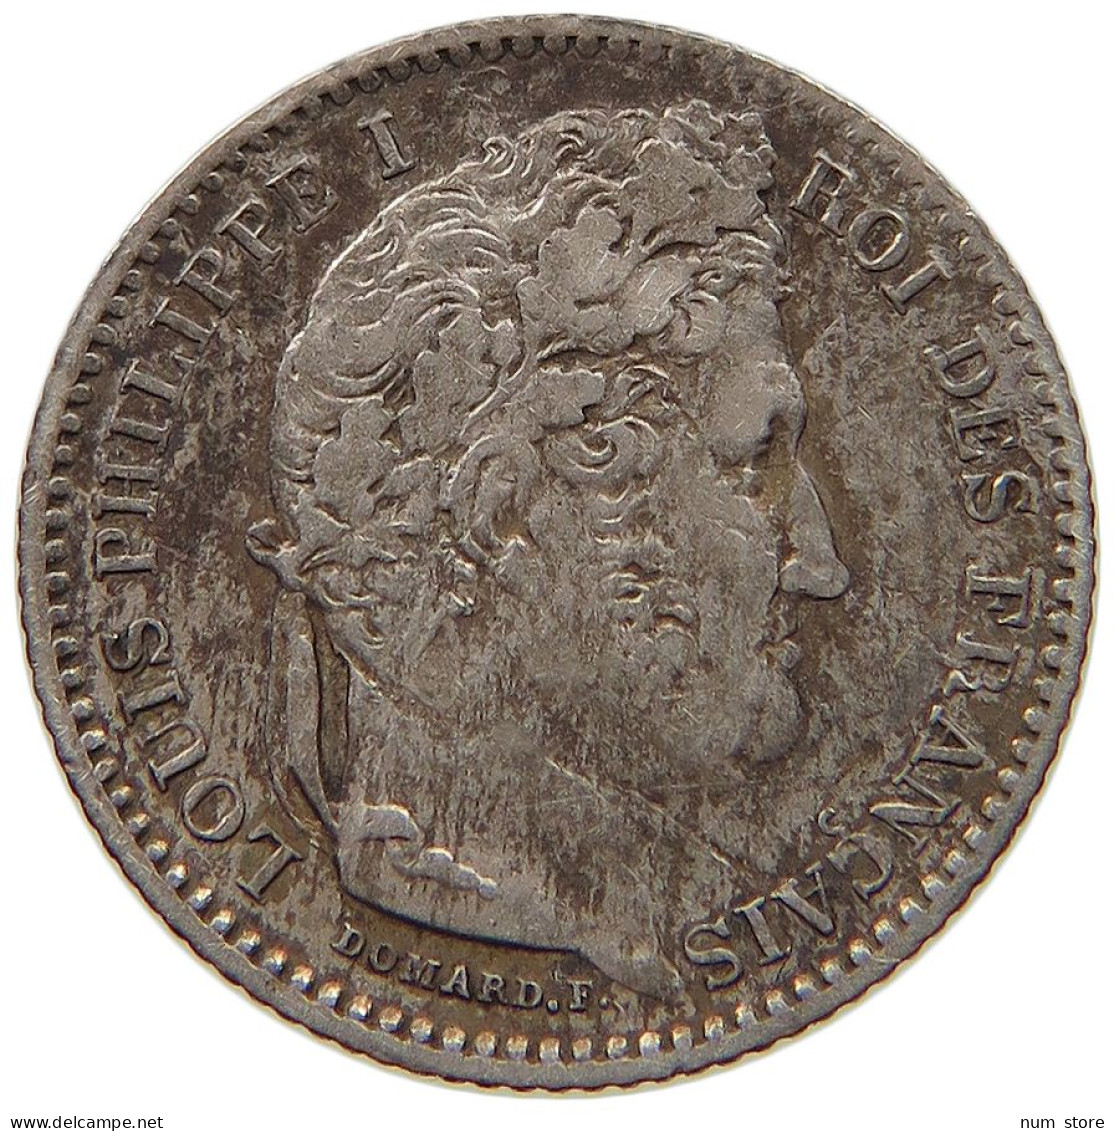 FRANCE 25 CENTIMES 1847 A LOUIS PHILIPPE I. (1830-1848) #t058 0267 - 25 Centimes